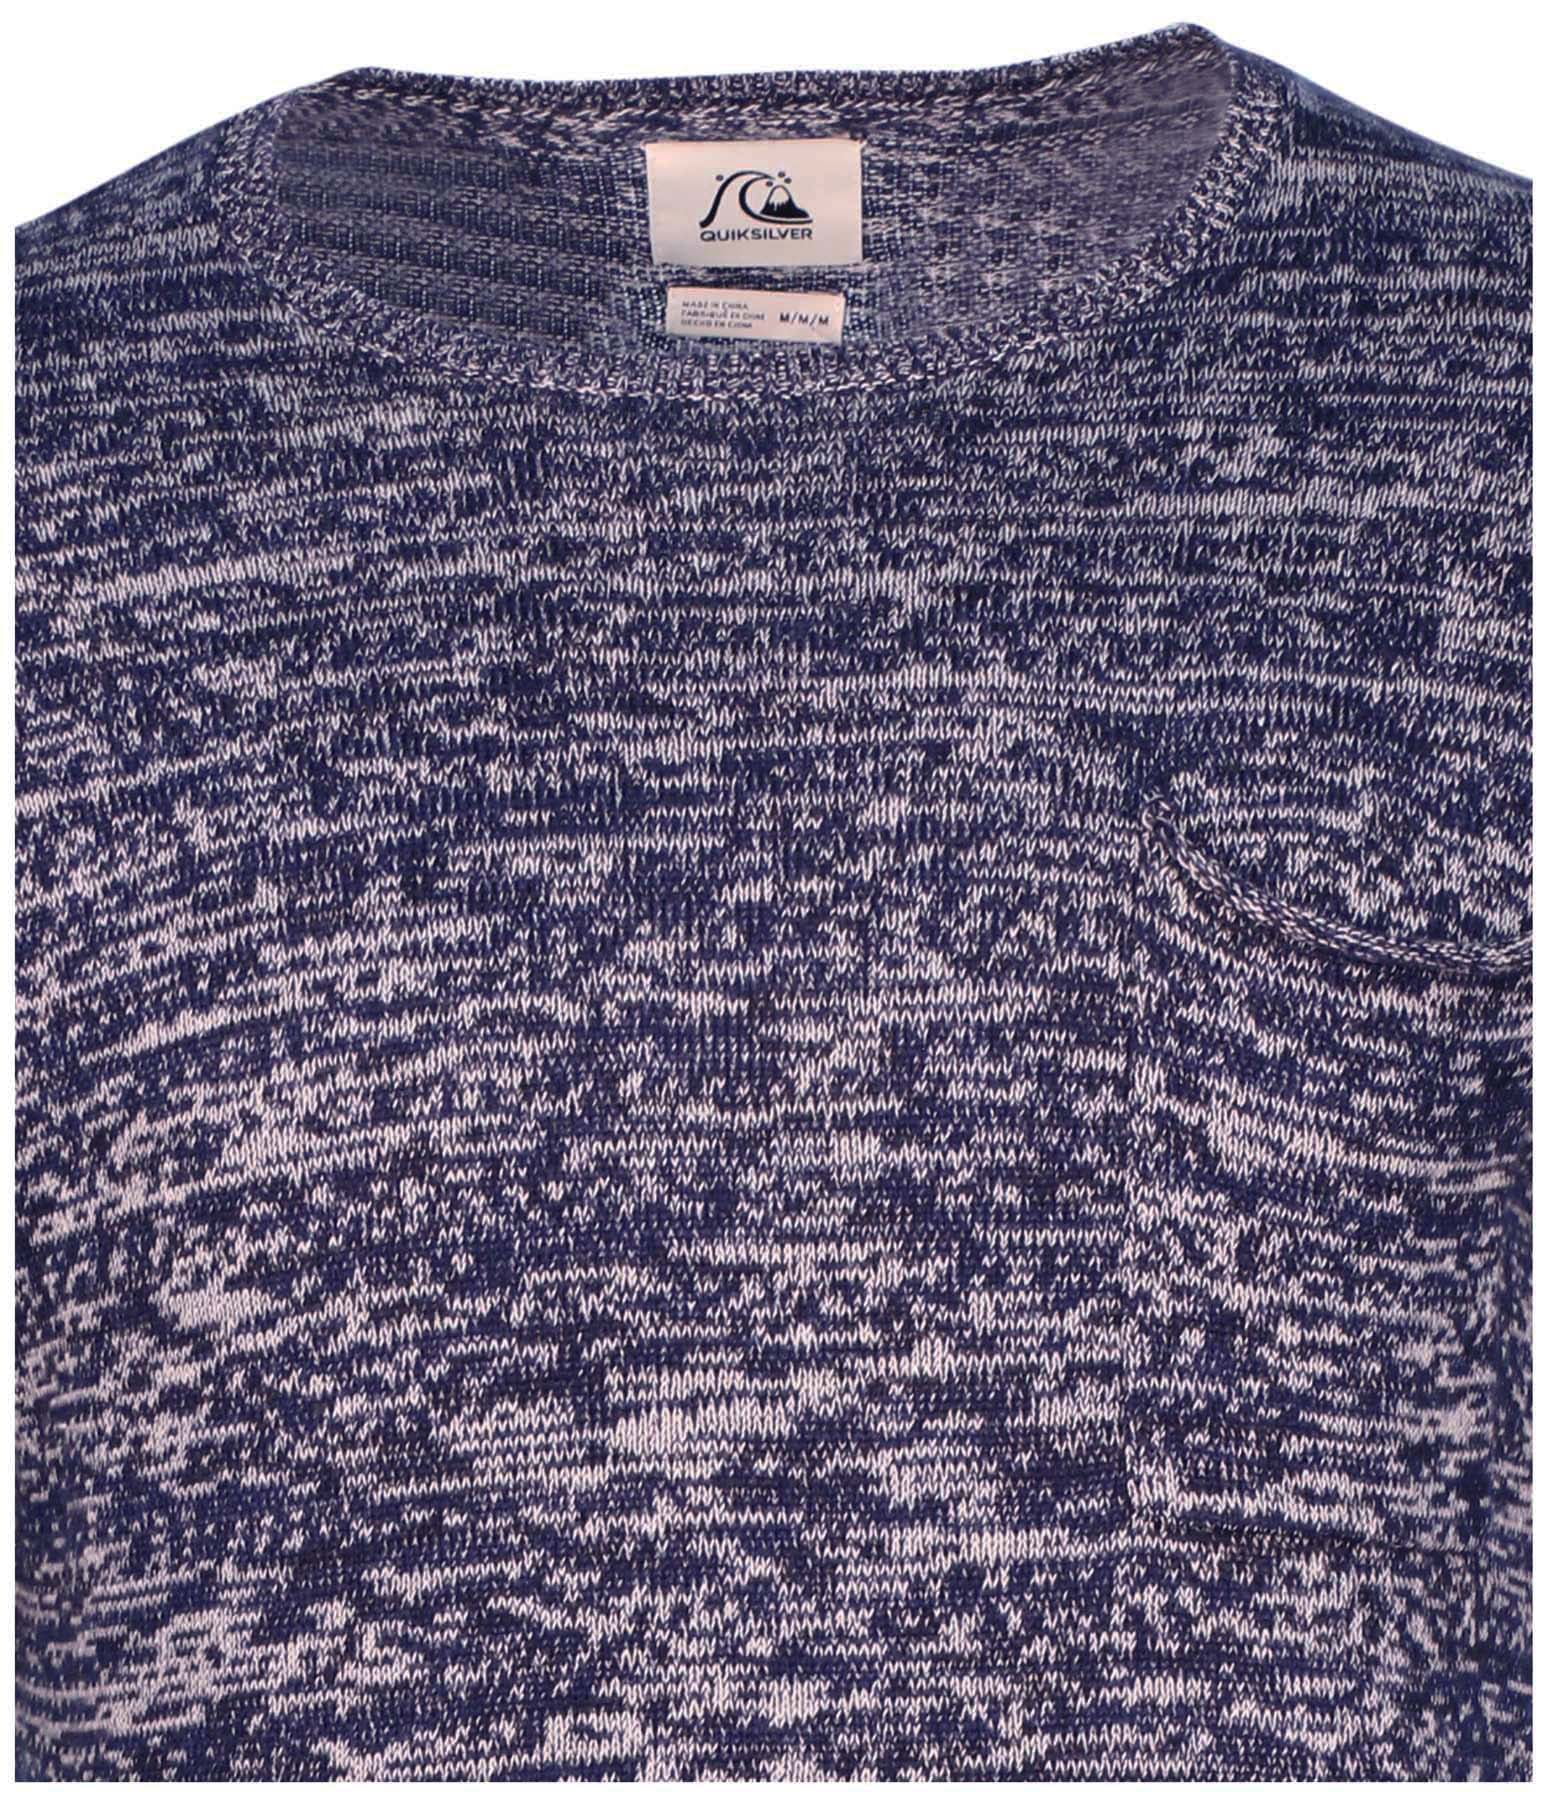 Quiksilver Mens Crooked Sweater 